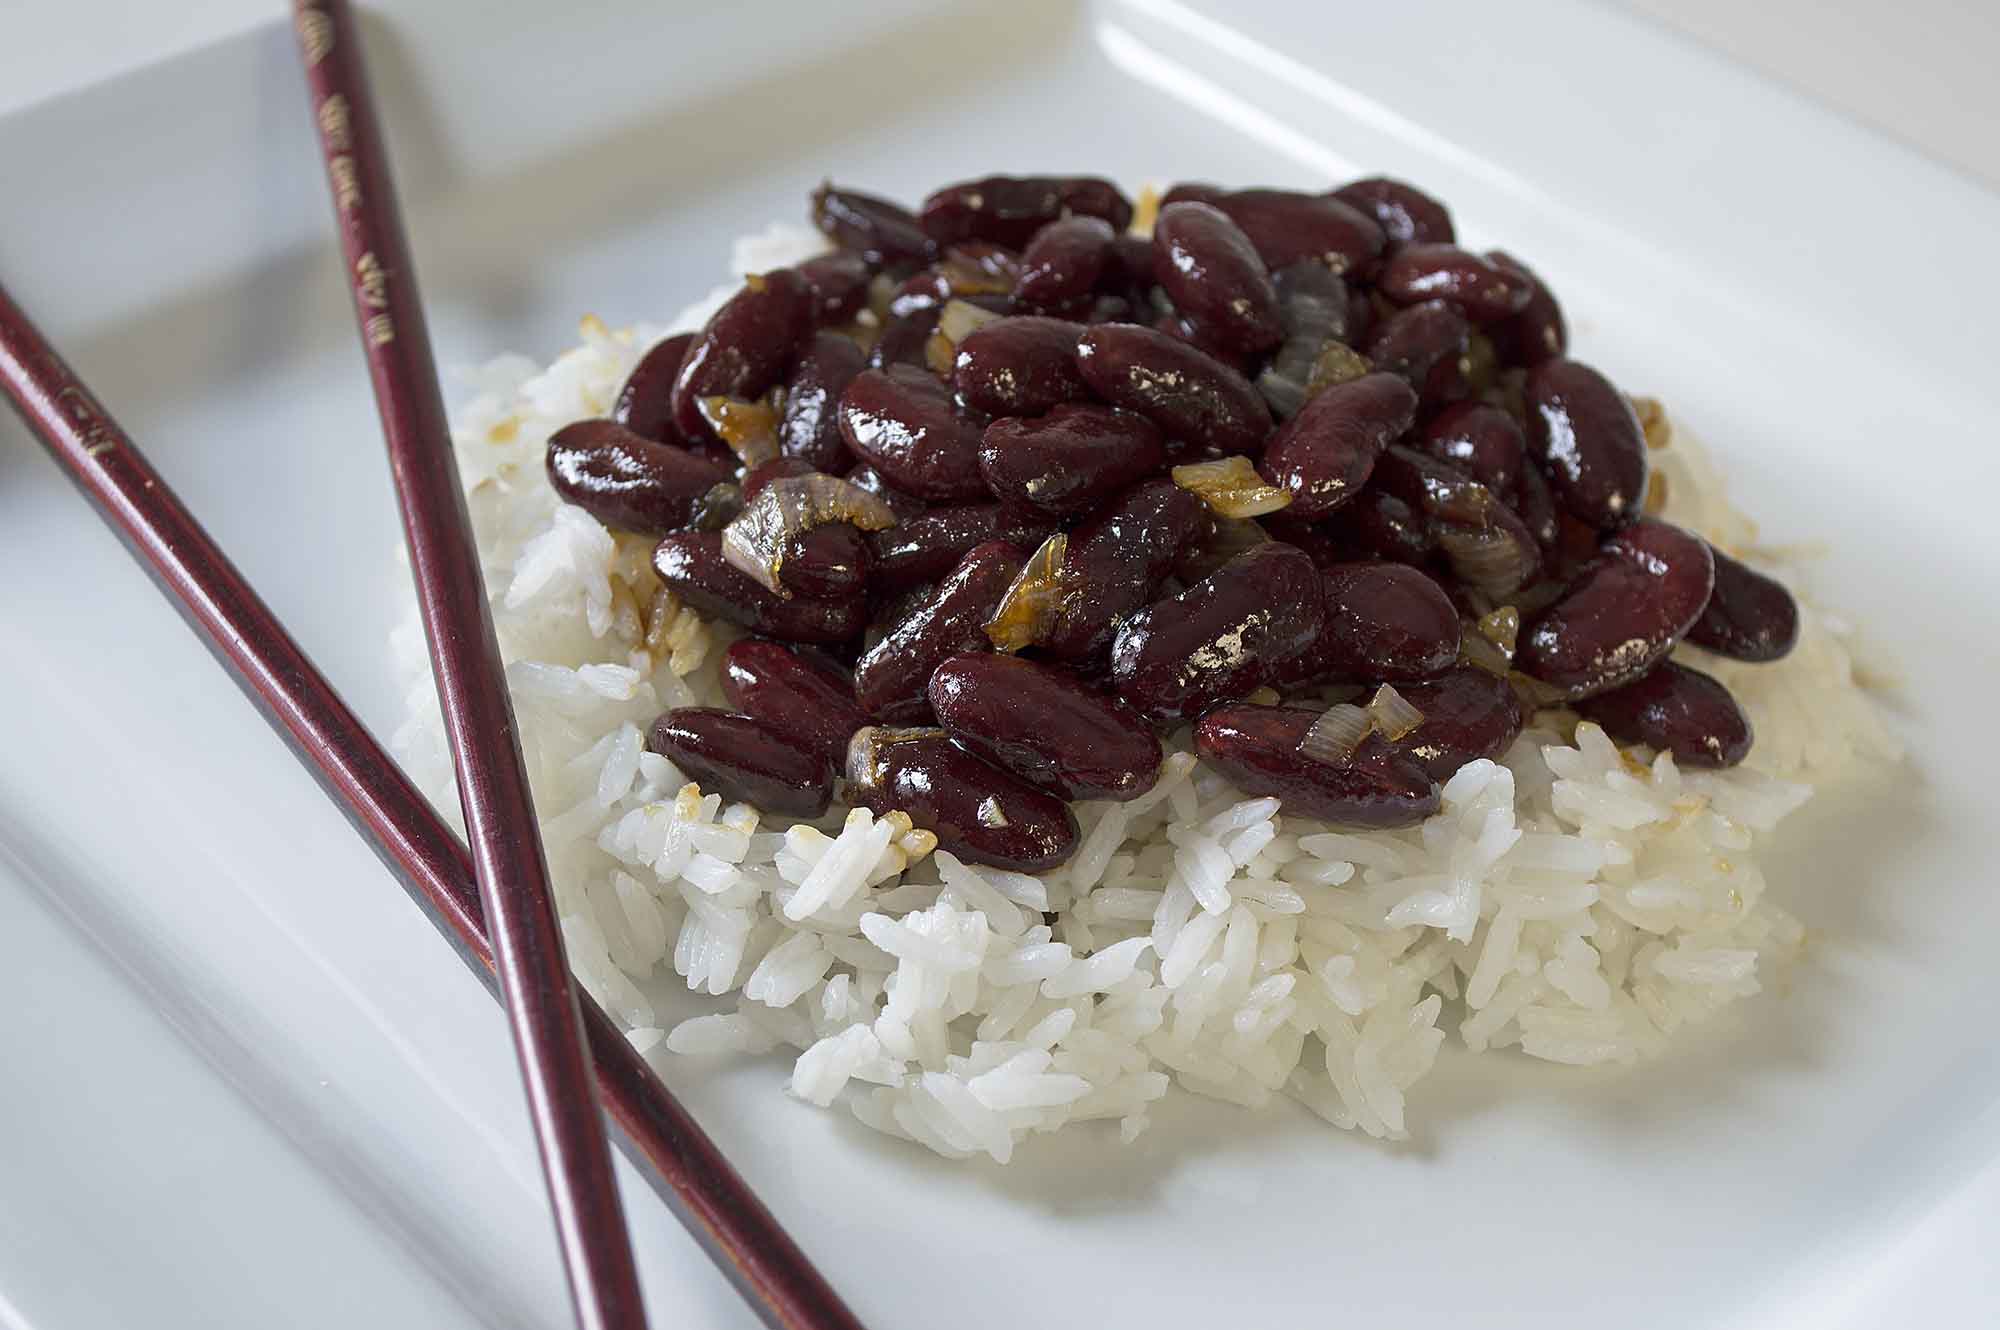 Garlic Molasses Sauce on Kidney Beans and Rice